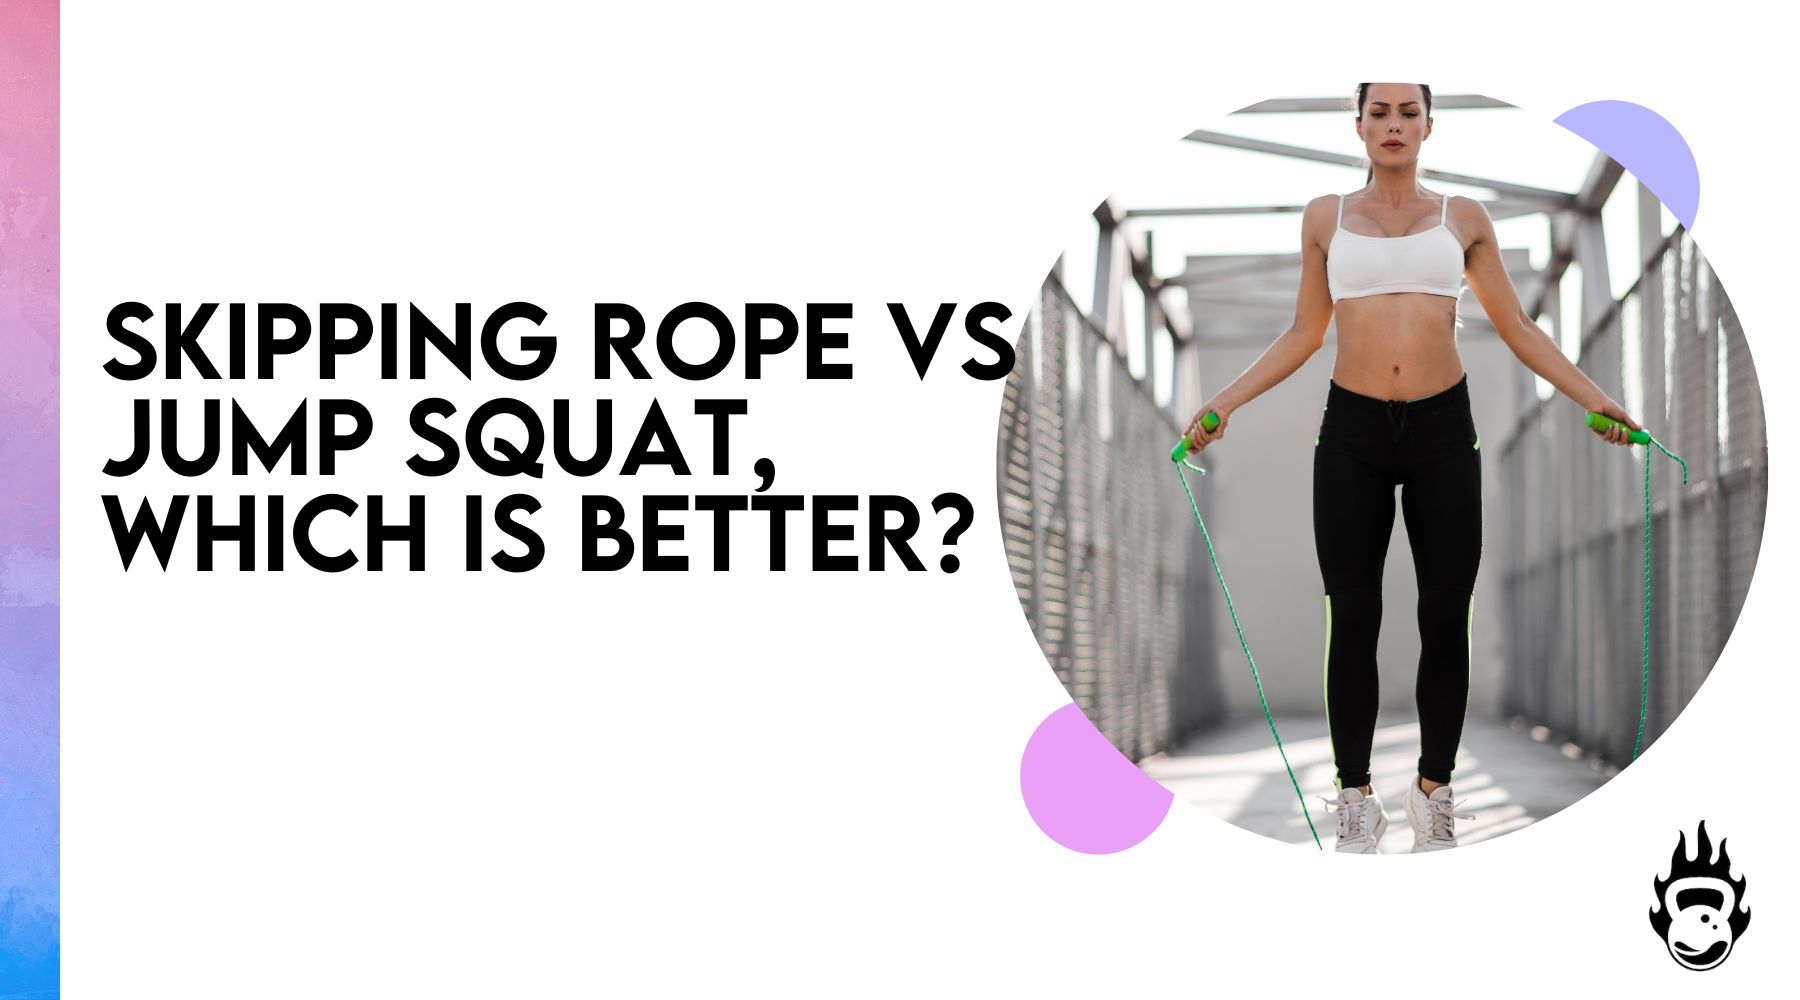 Skipping rope vs Jump squat, which is better?